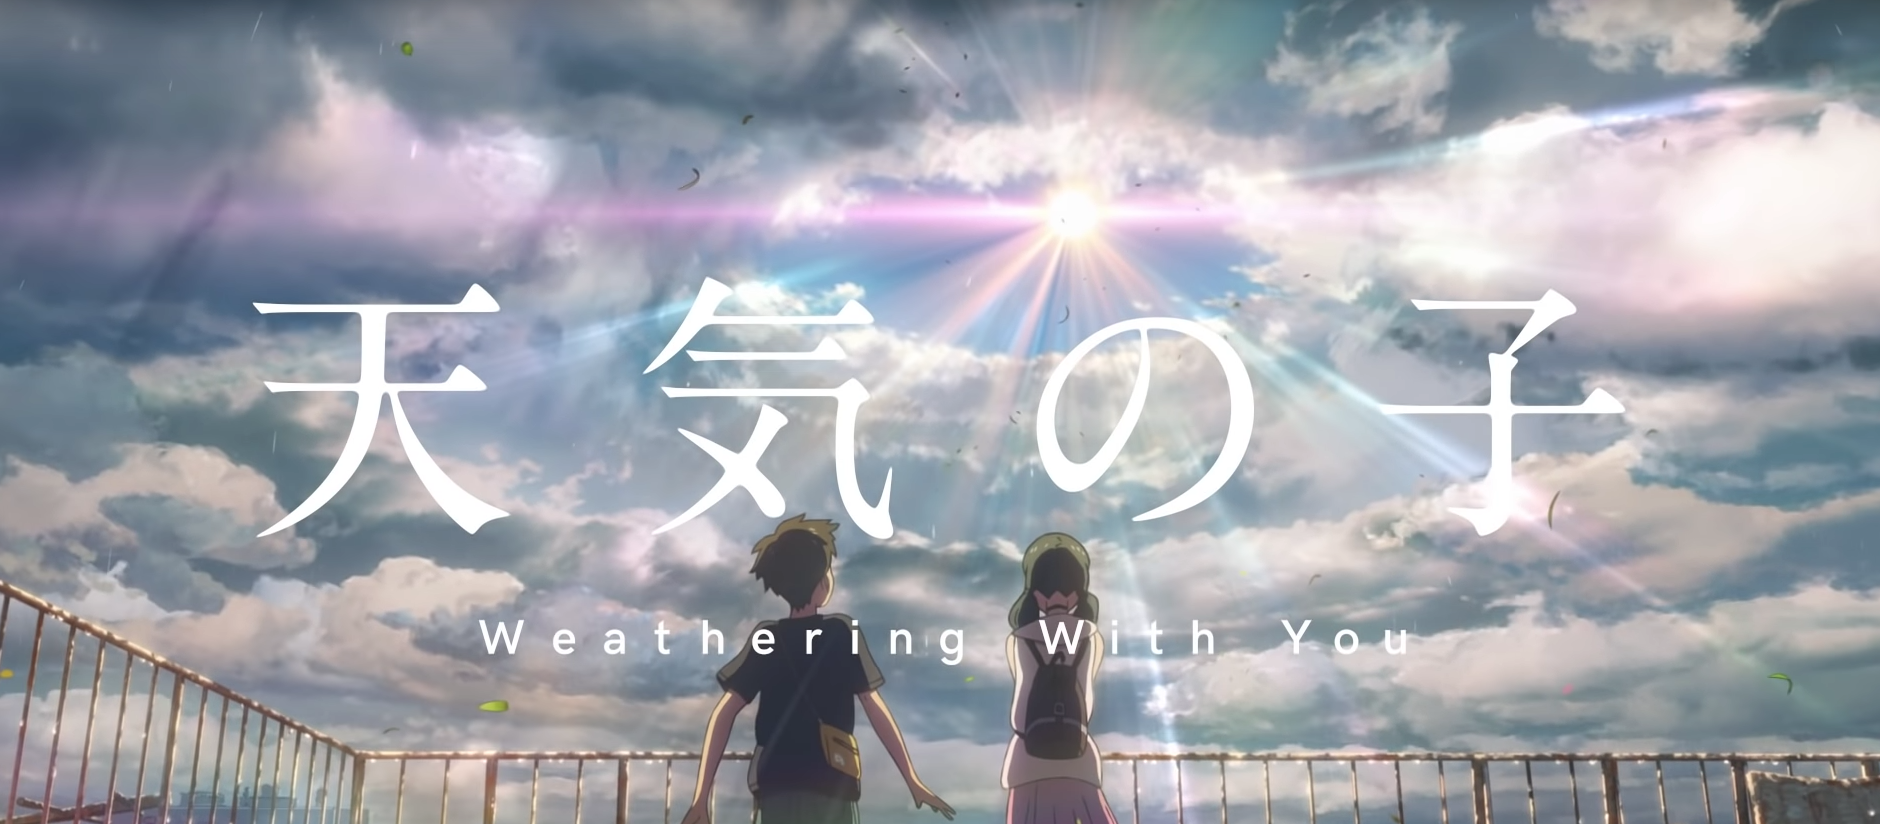 Après Your Name, Weathering with You va vous transporter (trailer)